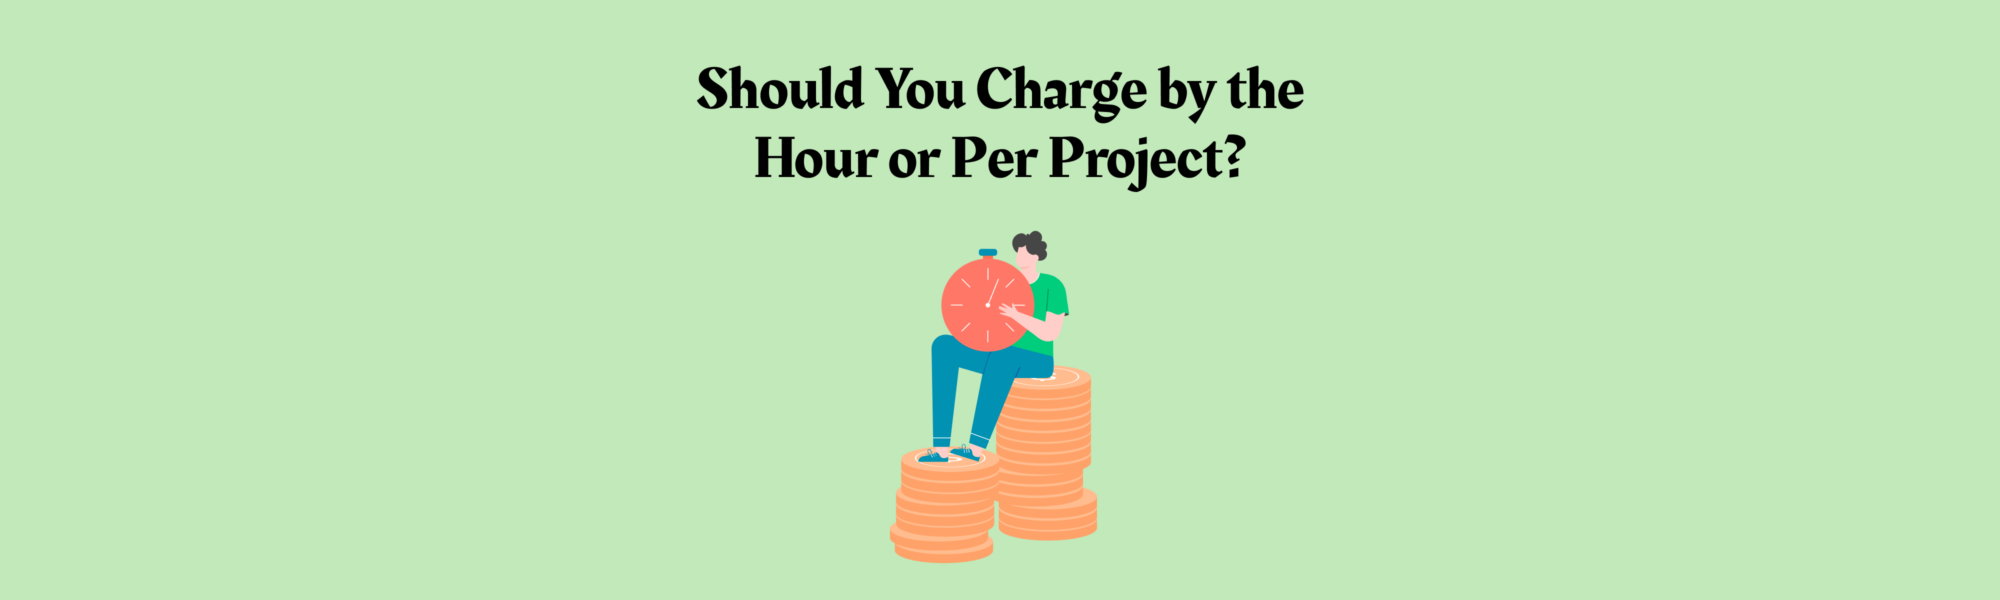 Should you charge by the hour or per project?